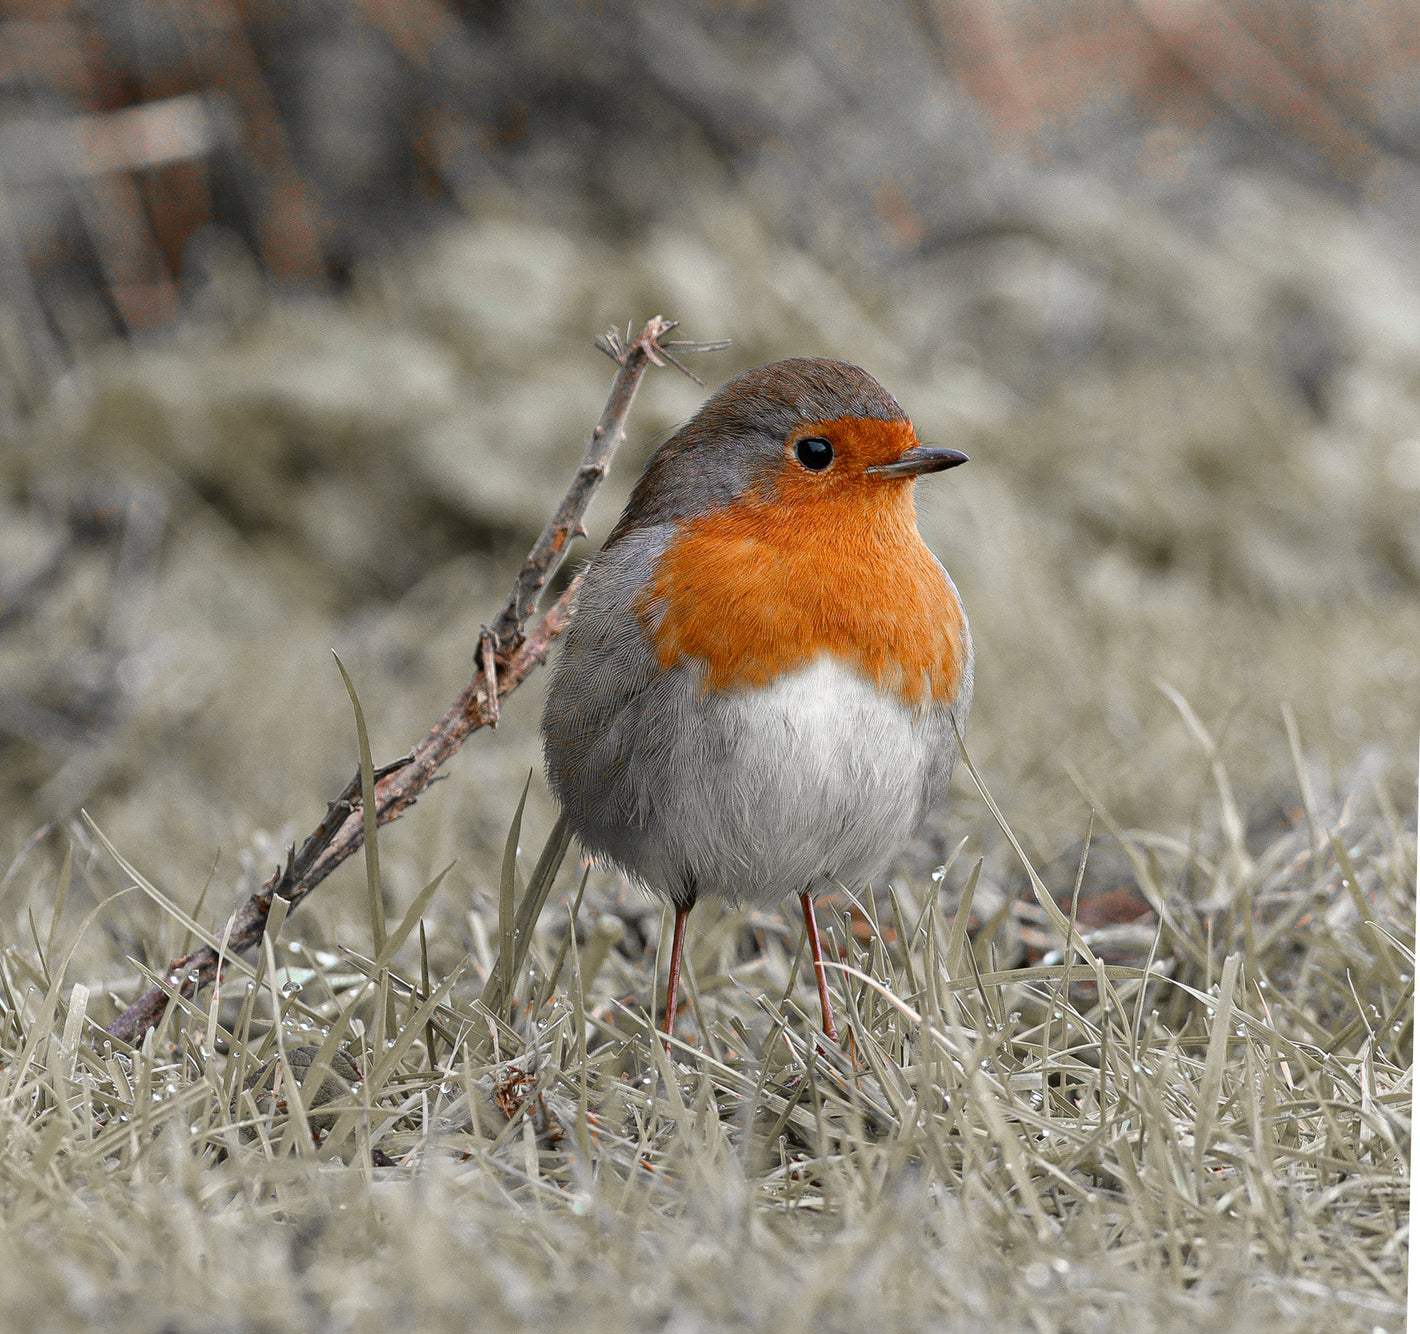 A Robin standing in in frosty and wet grass.